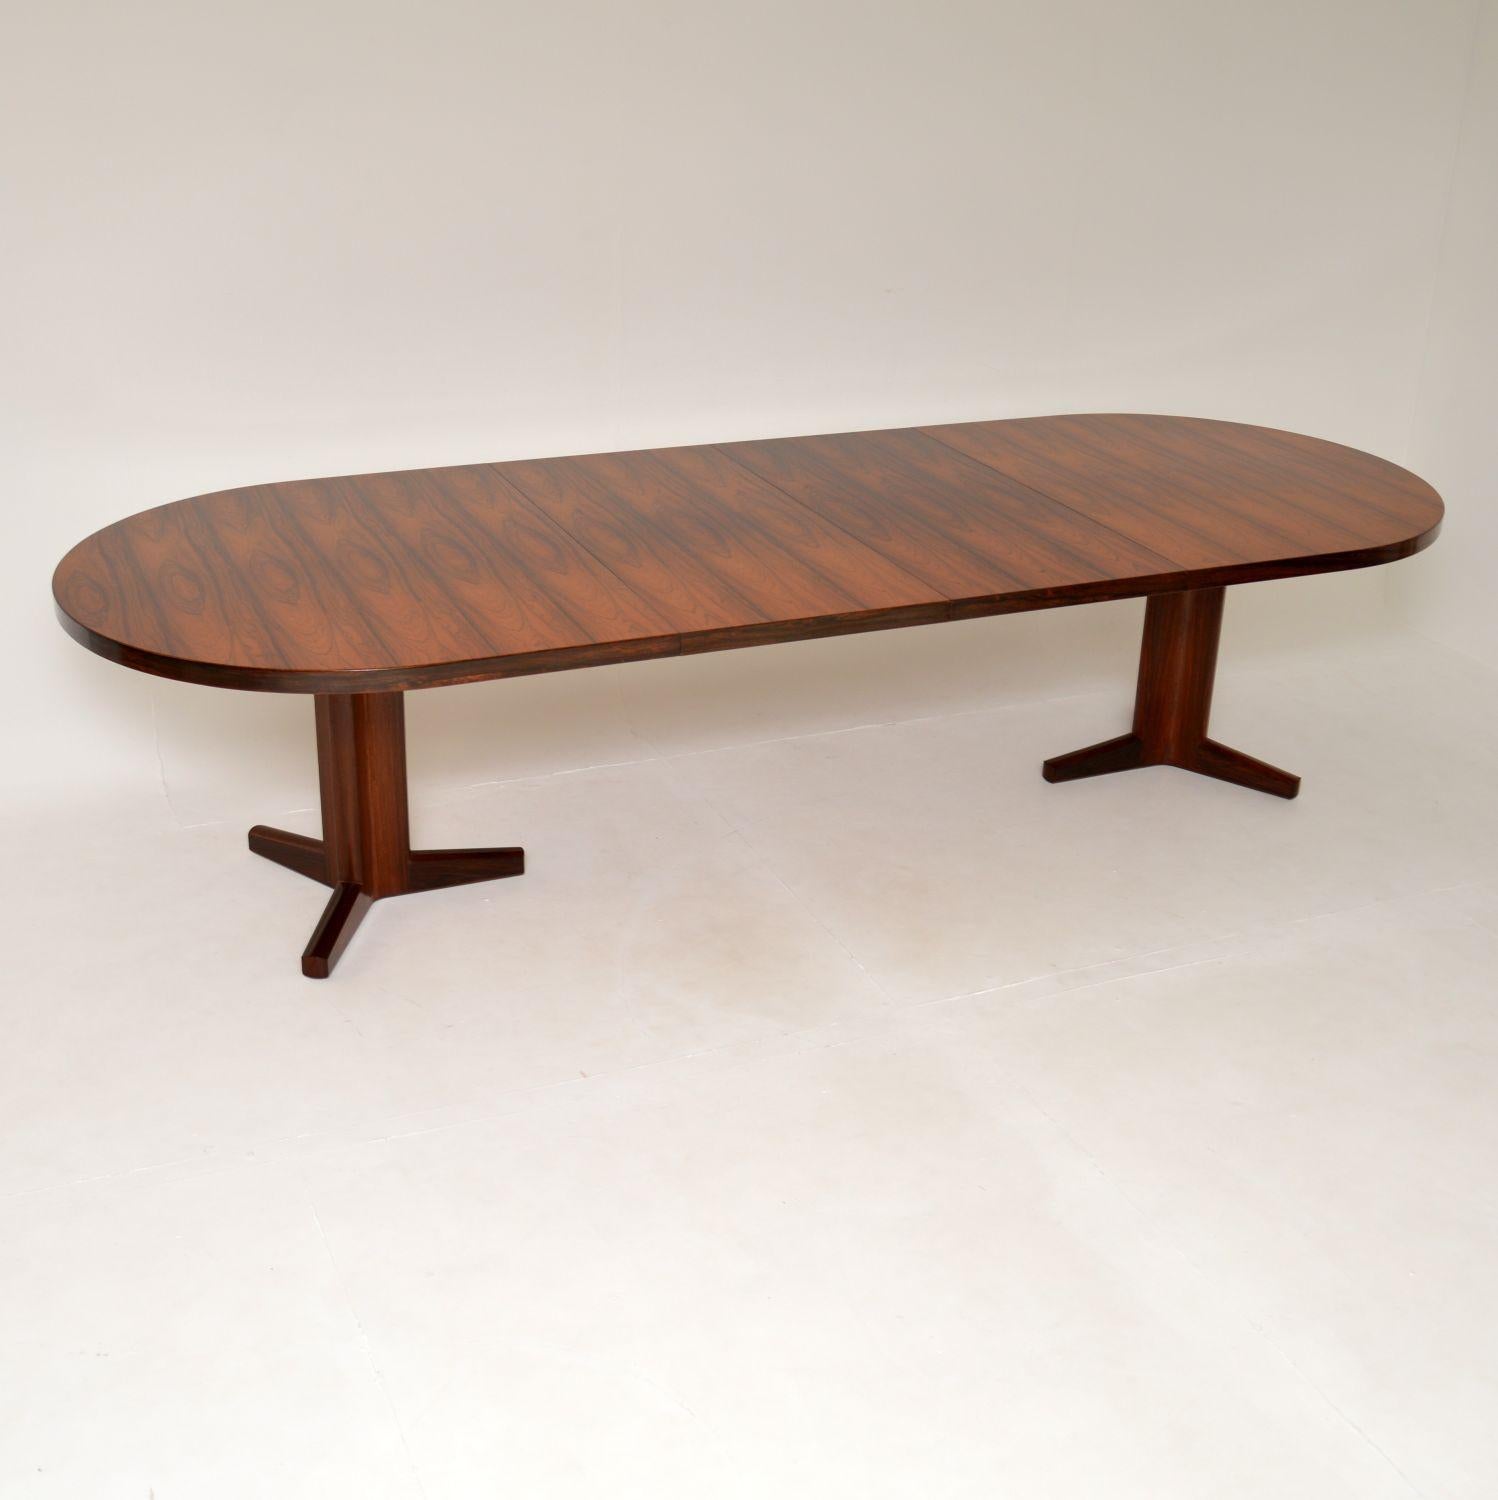 An extremely rare, very large and incredibly well made dining table. This was designed by Martin Hall for the Gordon Russell Marwood range. This is actually a limited edition design, and this is number 168 of only 200 ever made.

It has two leaves